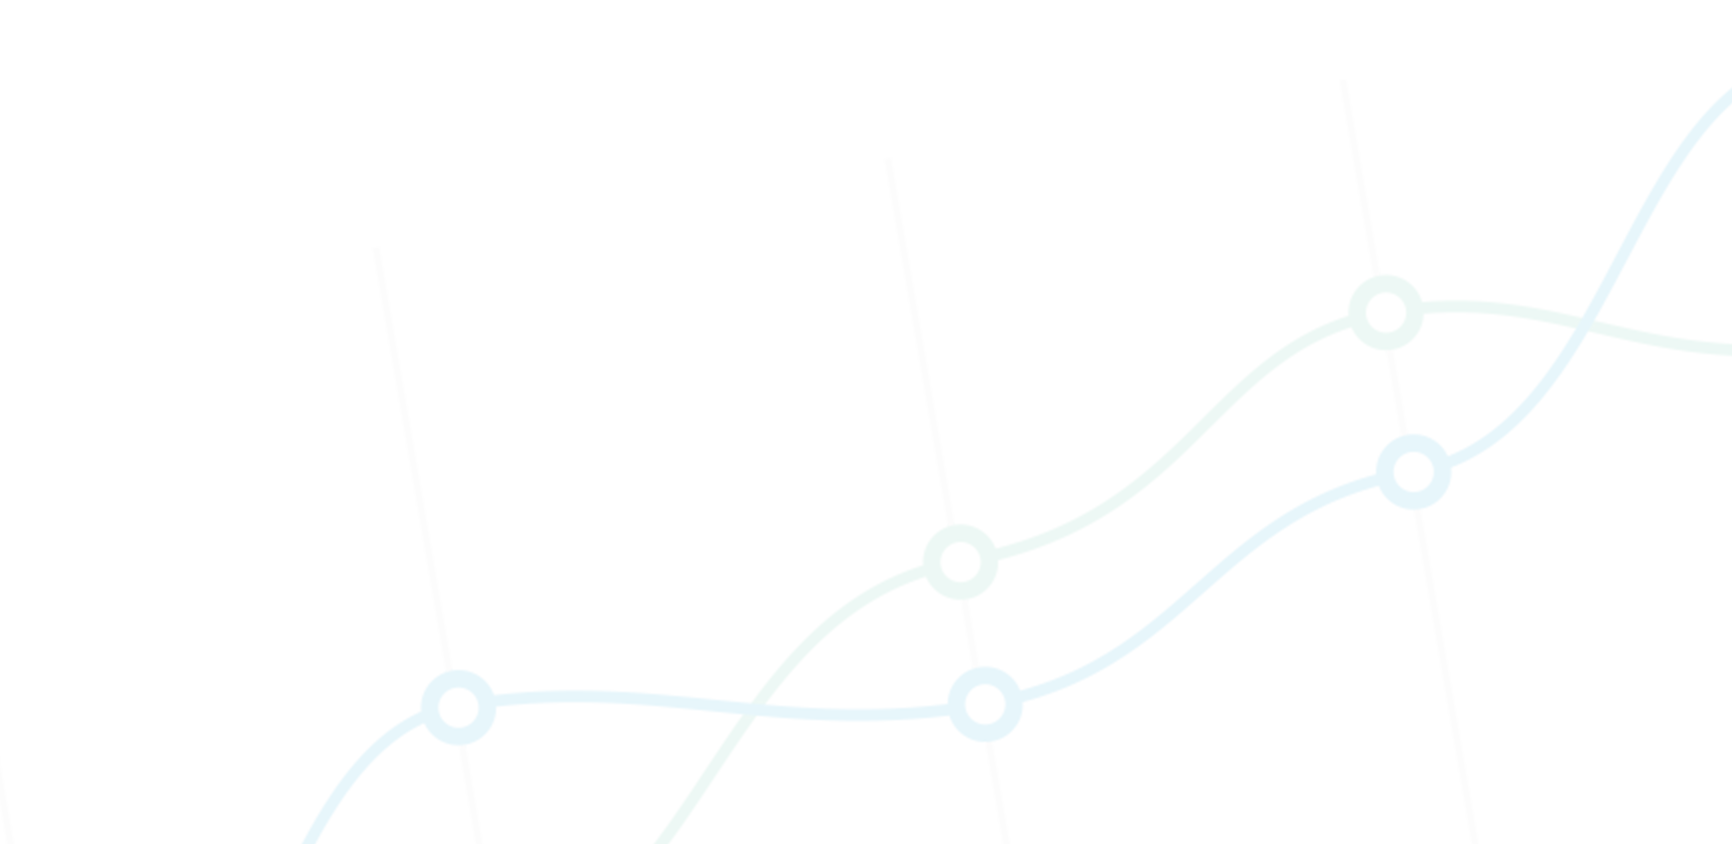 a stylized line graph showing a blue and a green line with hollow circular points